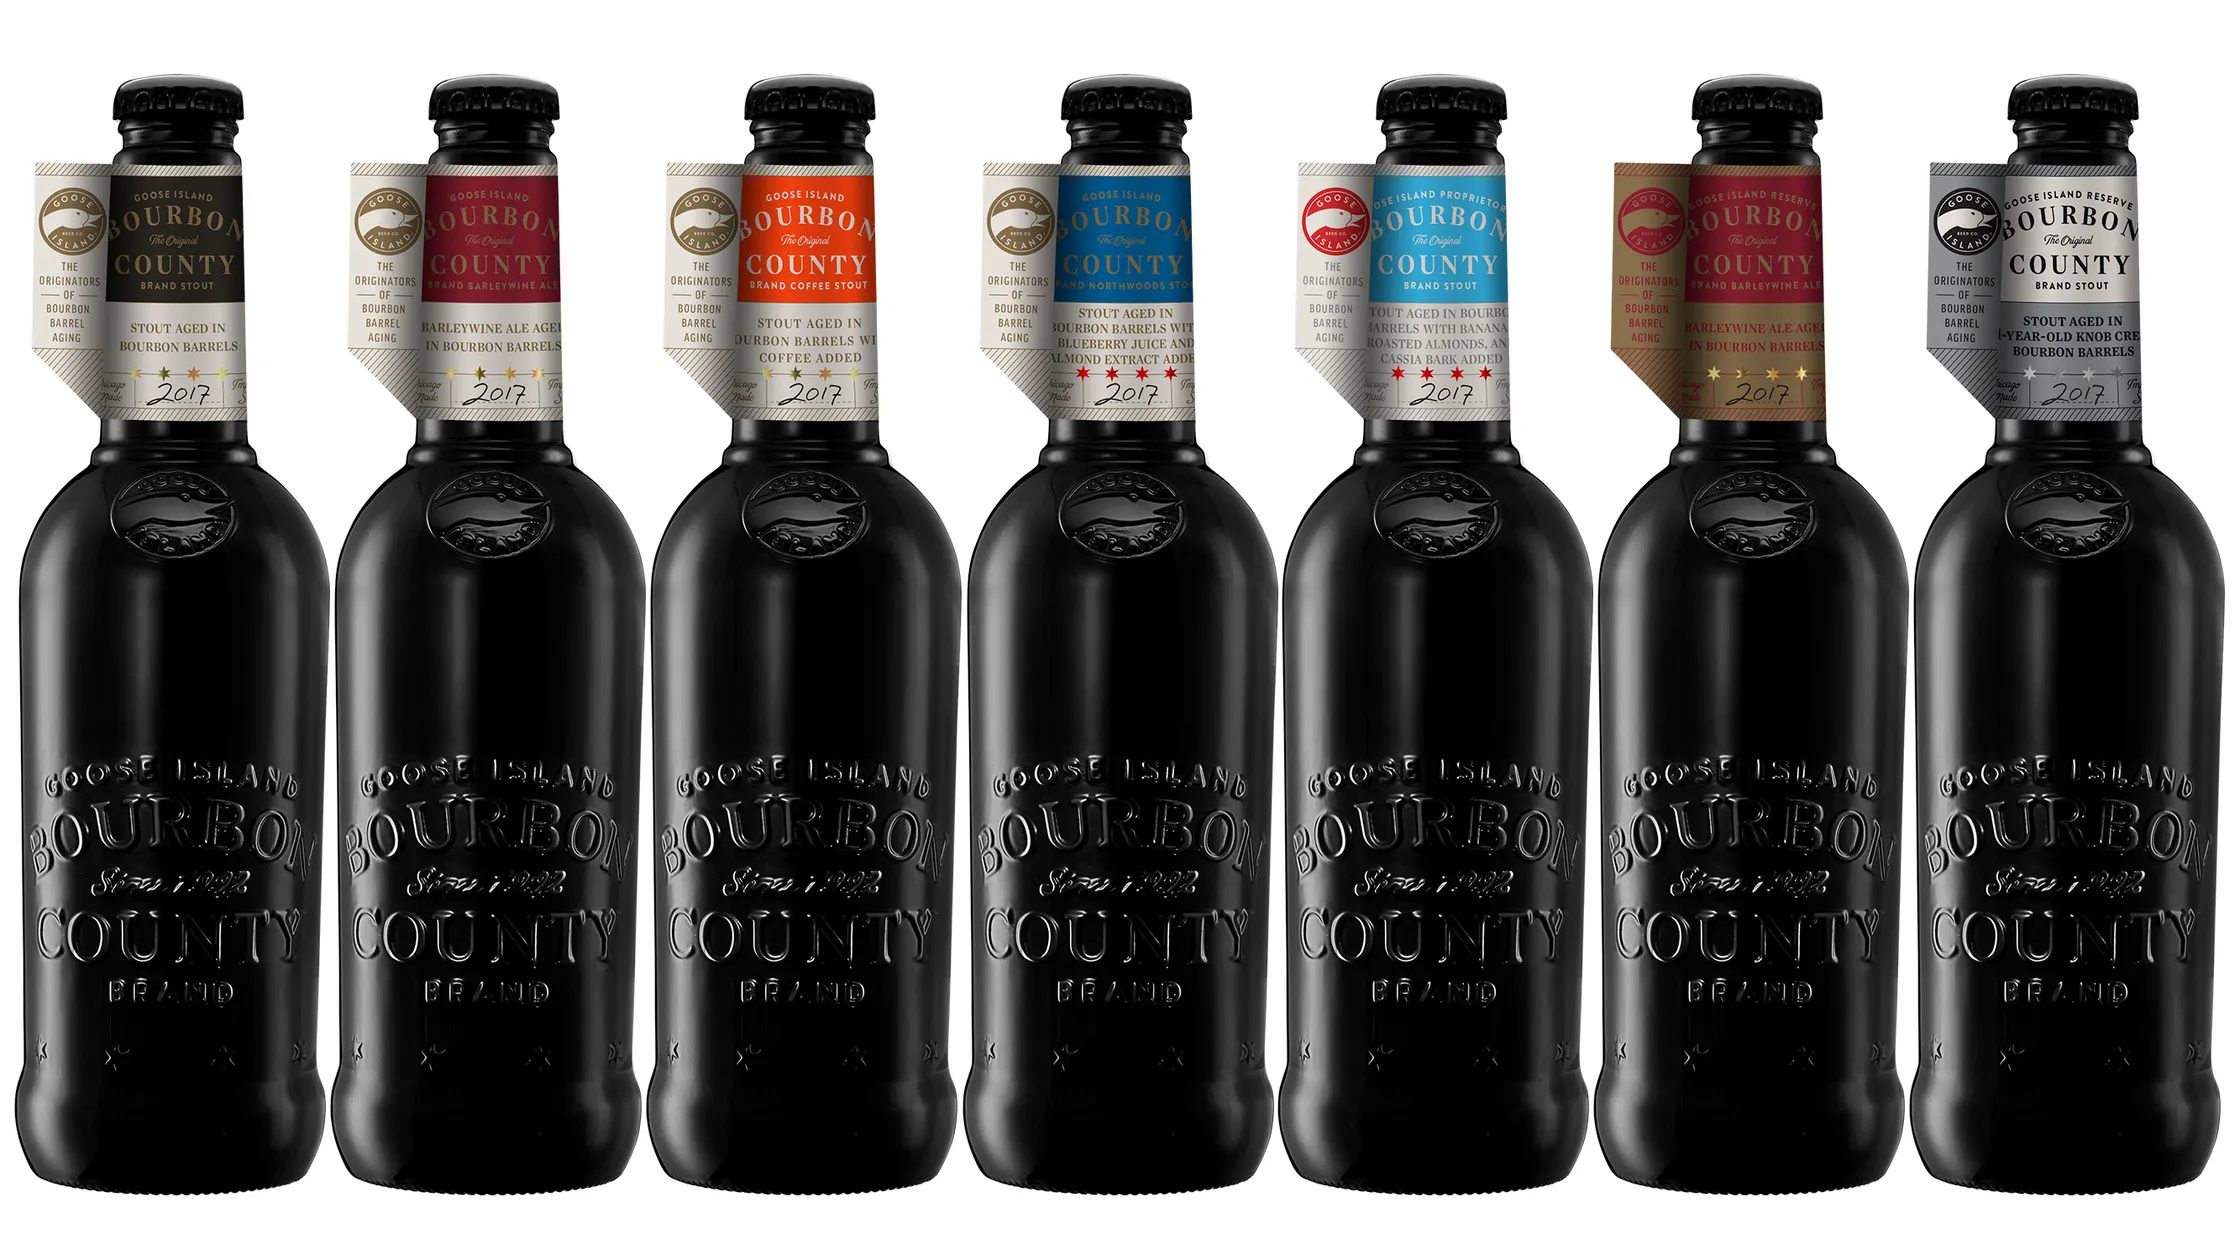 Goose Island Bourbon County Stout Review: Excellence in Barrel-Aging